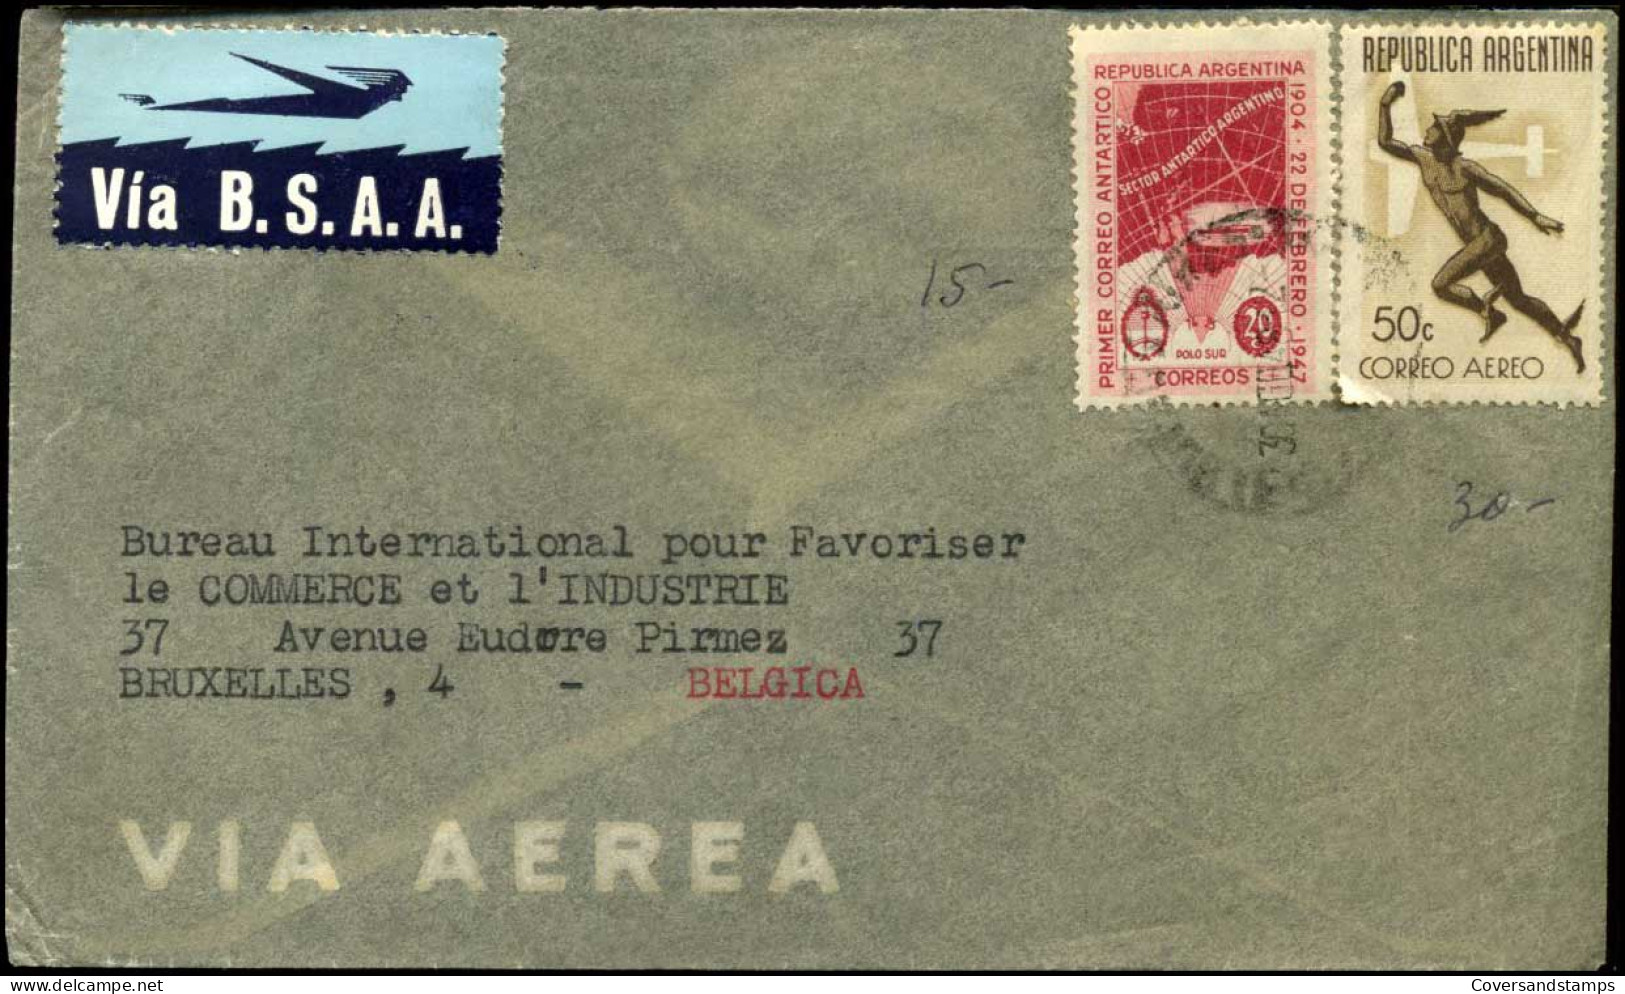 Cover To Brussels, Belgium - Via B.S.A.A. -- "Primer Correo Antartico" - Airmail